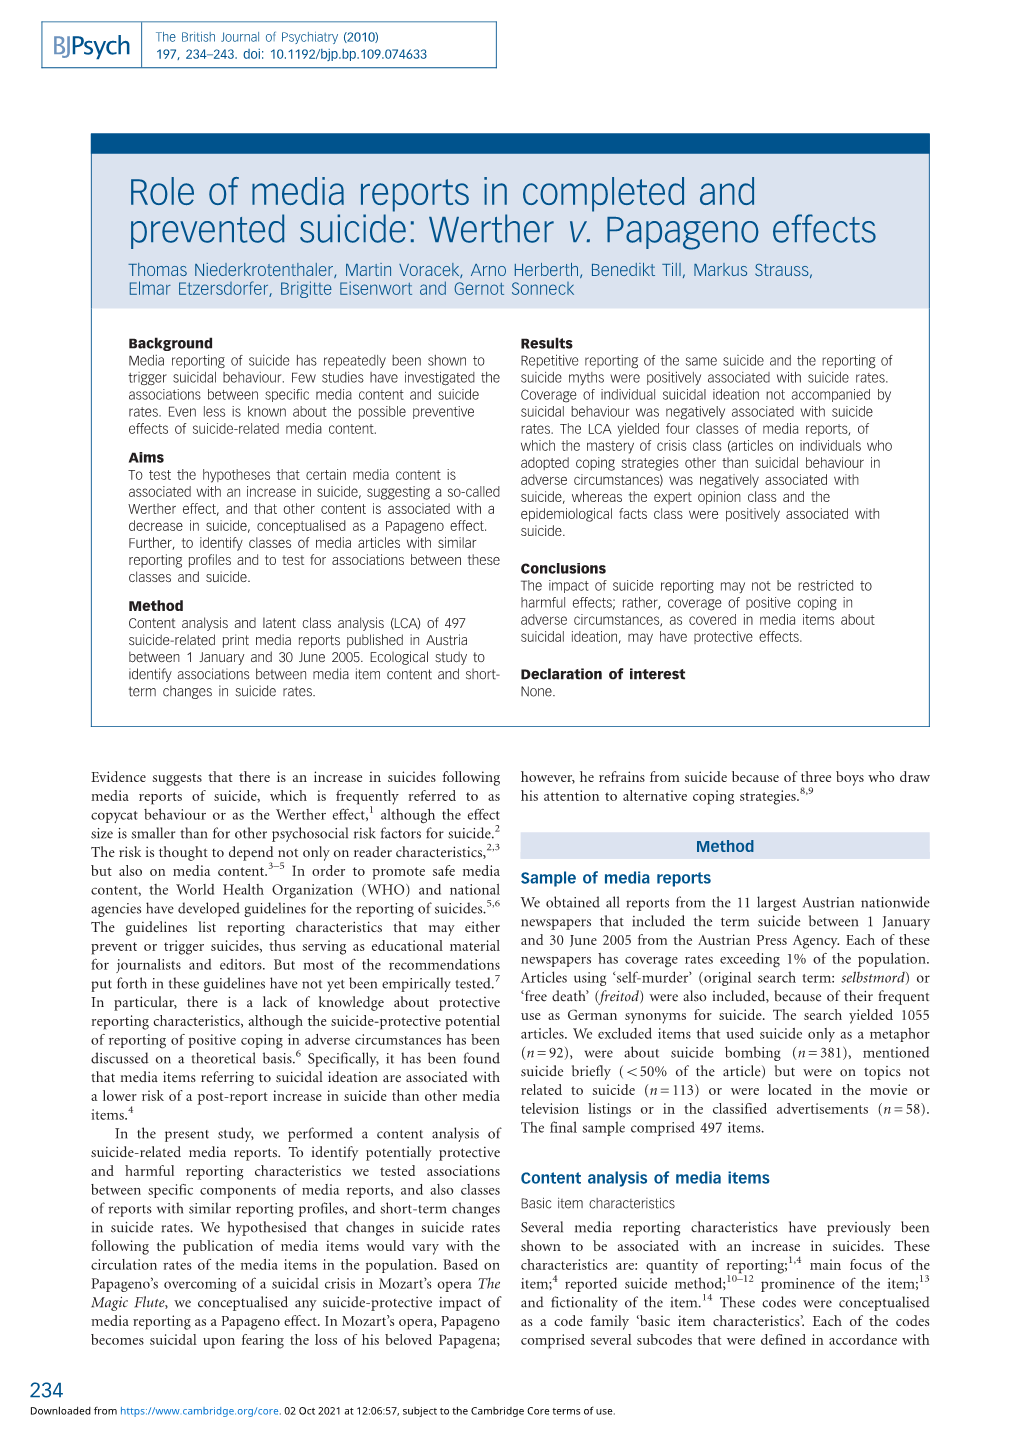 Role of Media Reports in Completed and Prevented Suicide: Werther V